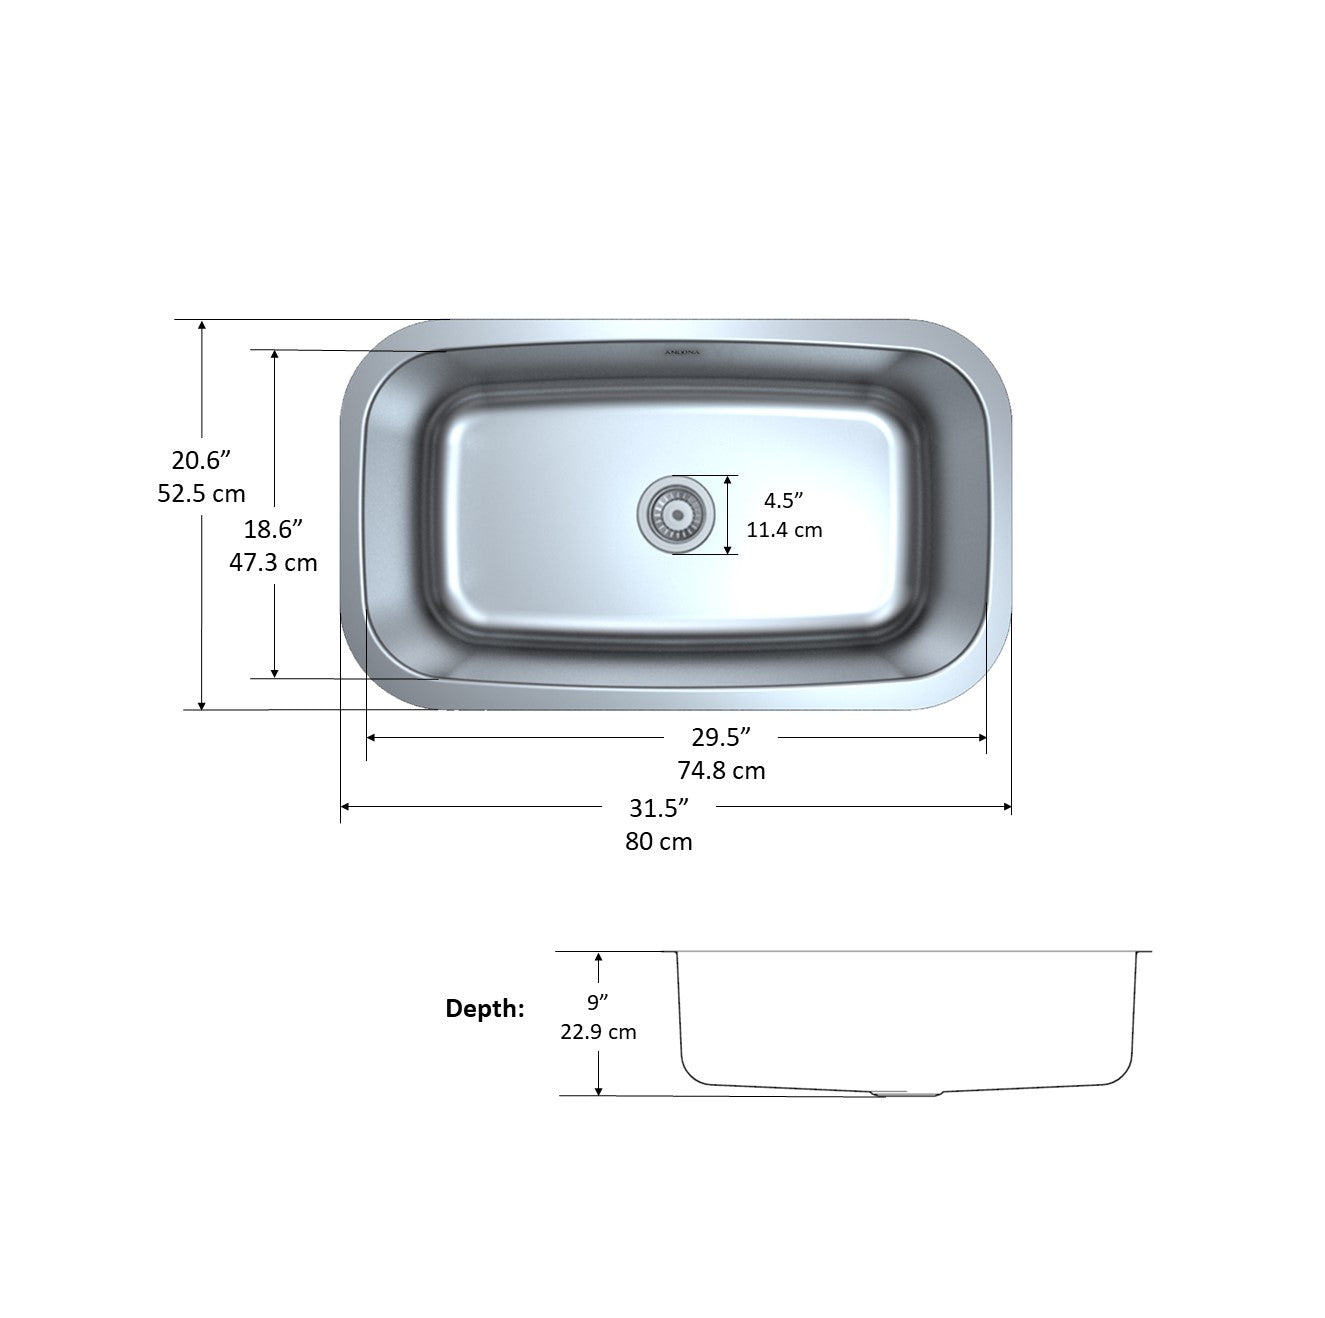 Capri Series Undermount Stainless Steel 32 in. Single Bowl Kitchen Sink in Satin Finish with Strainer